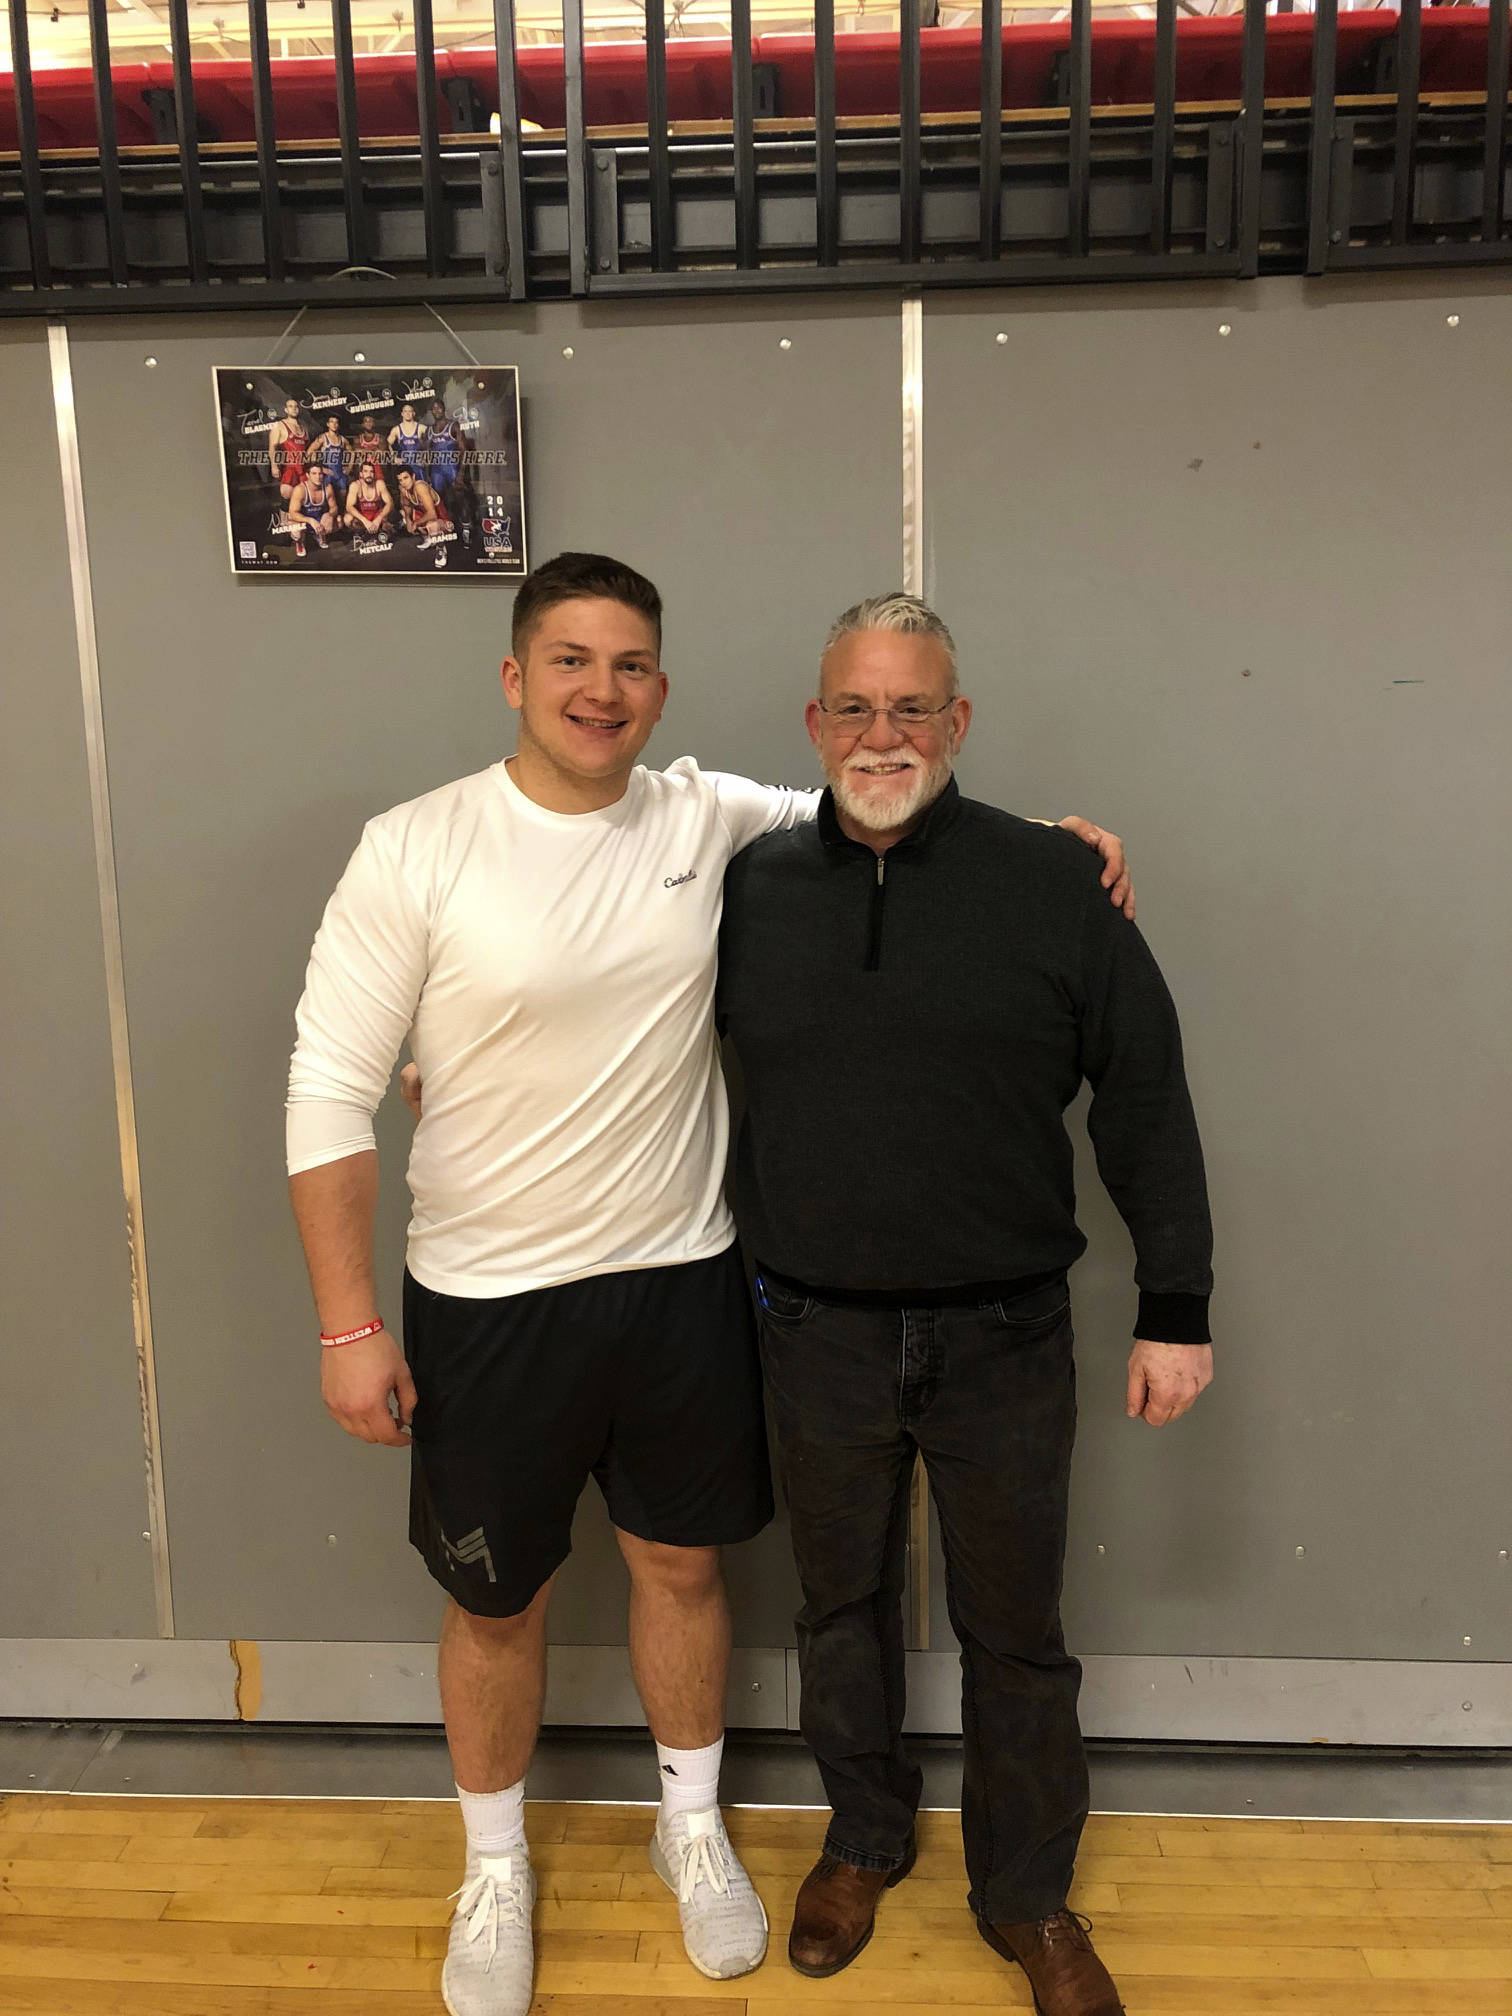 Mount Si Wildcats senior Slater Macko, left, and Mount Si Wildcats head football coach Charlie Kinnune, right, pose for a quick picture in 2019. Macko will compete in the Washington State Coaches Association all-state game this July. Photo courtesy of Charlie Kinnune